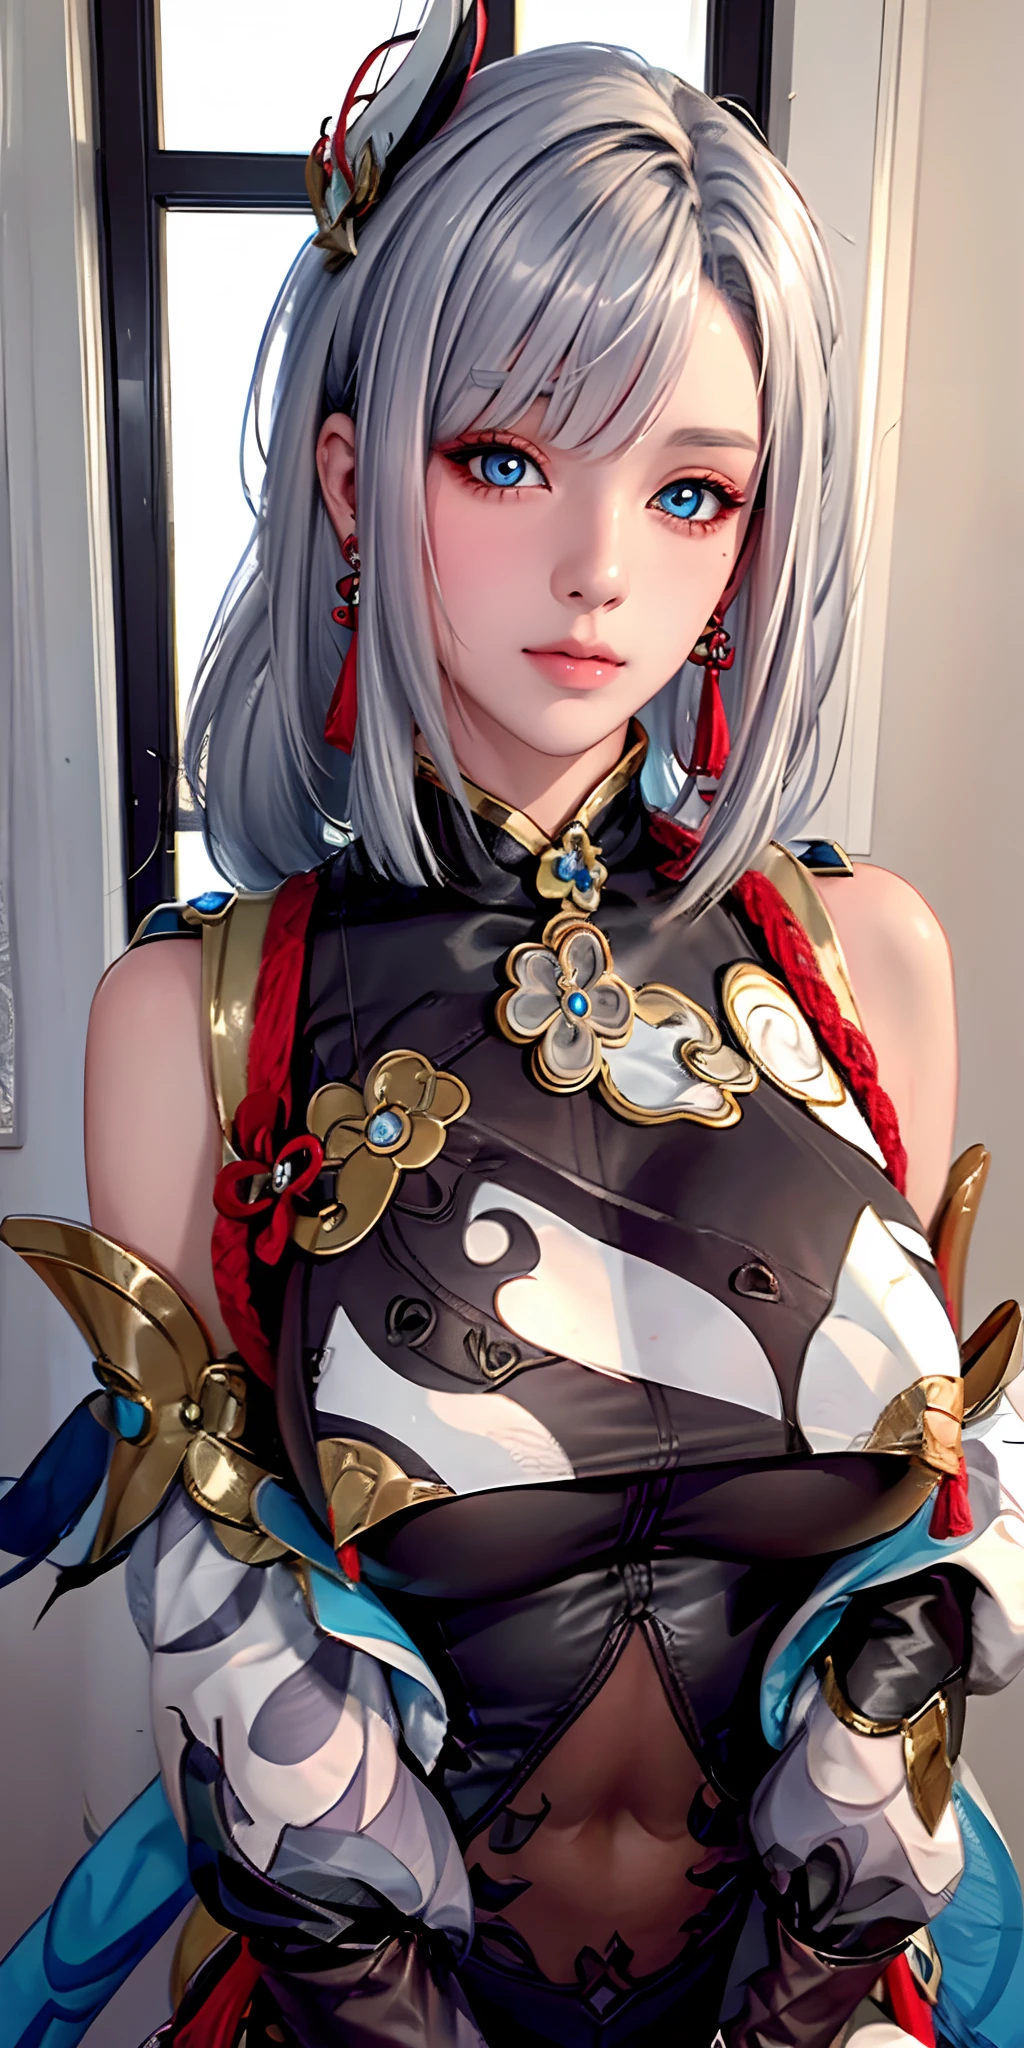 （（（shenhe_Genshin，hitman，Genshin Impact，Long_Hair, Blue_Eyes, bangs, Hair_polypubic hair_One_eye, Breasts, Hair_decorations, Large_Breasts, jewelry, Grey_Hair, White_Hair, nipple tassels, Earrings, Very_Long_Hair, Braid, breast enhancement_curtain）））,((Masterpiece)),A high resolution, ((Best quality))，tmasterpiece，top-quality，best qualityer，（（（ looking at viewert, There is light in the eyes））），（（（Light and shadow interlace，white skinned，gigantic cleavage breasts,huge boob，Raised ，laughingly，self-assured））），（（（Asian women in the United States, Surrealism female students, Korean girl, Surrealism female students, ulzzangs, Realistic , jaeyeon nam, sakimichan, , cute female student, Beautiful Anime High School Girls, Gorgeous young Korean woman））），